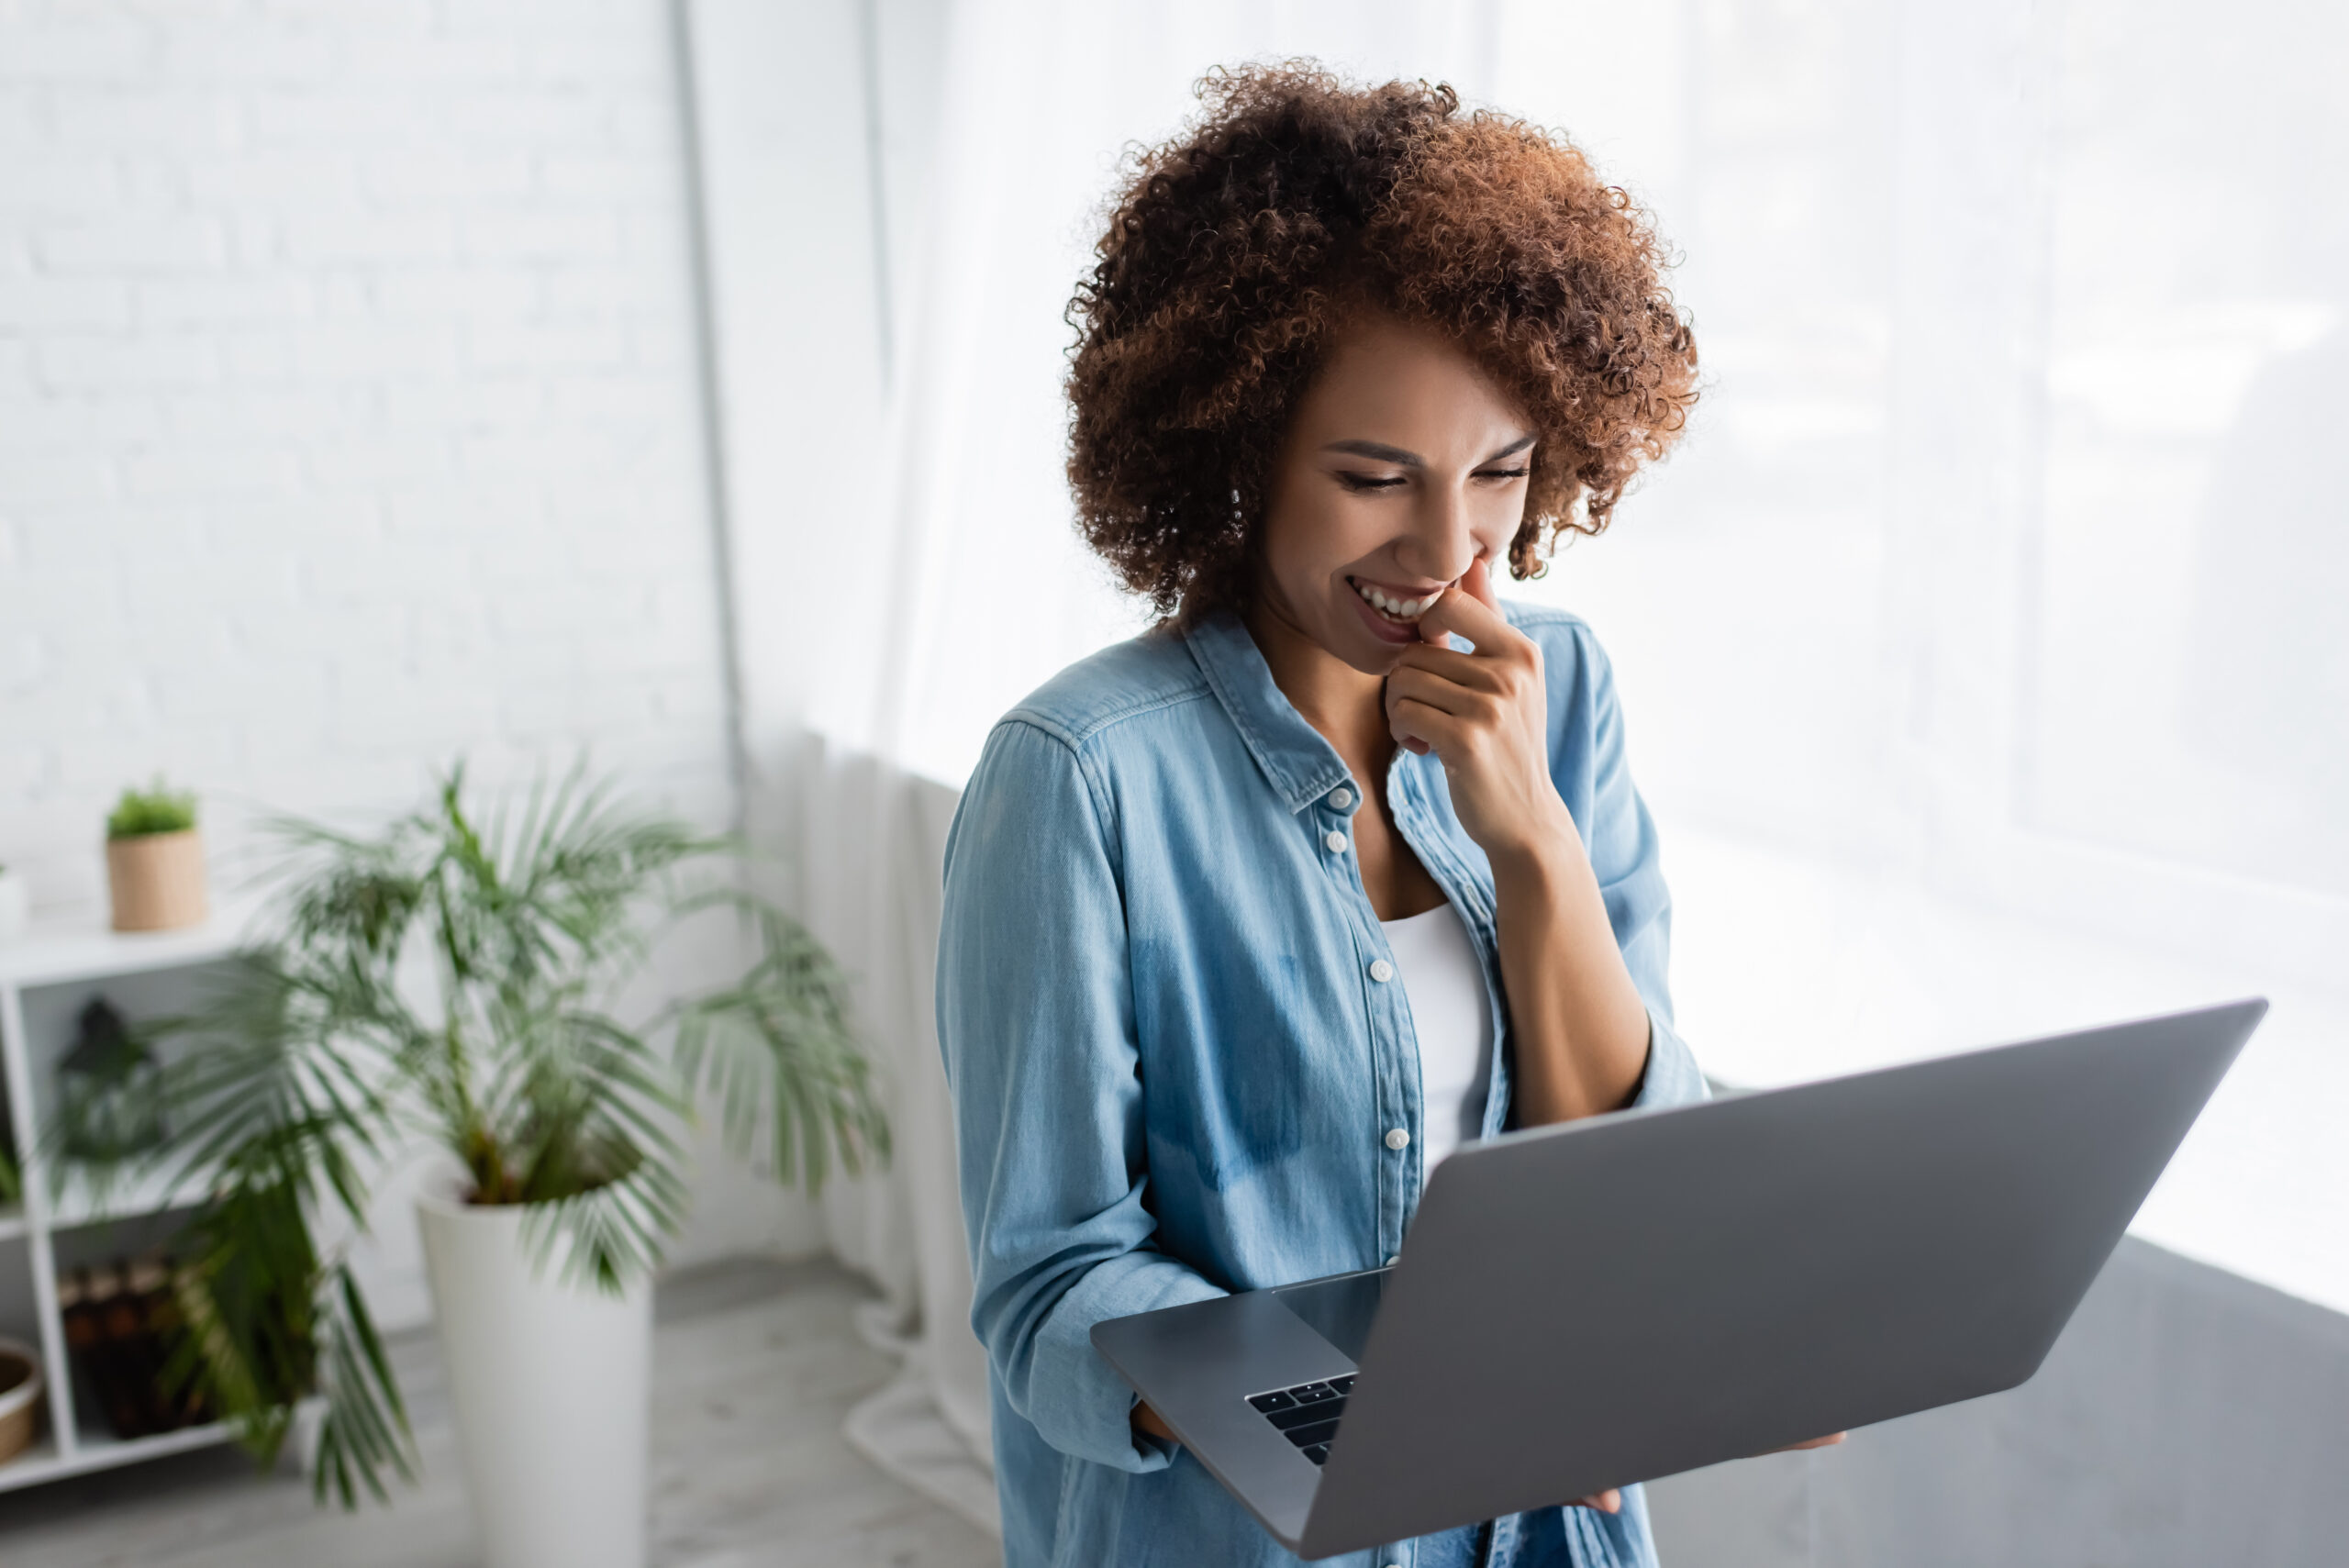 cheerful woman with curly hair holding laptop while working from home